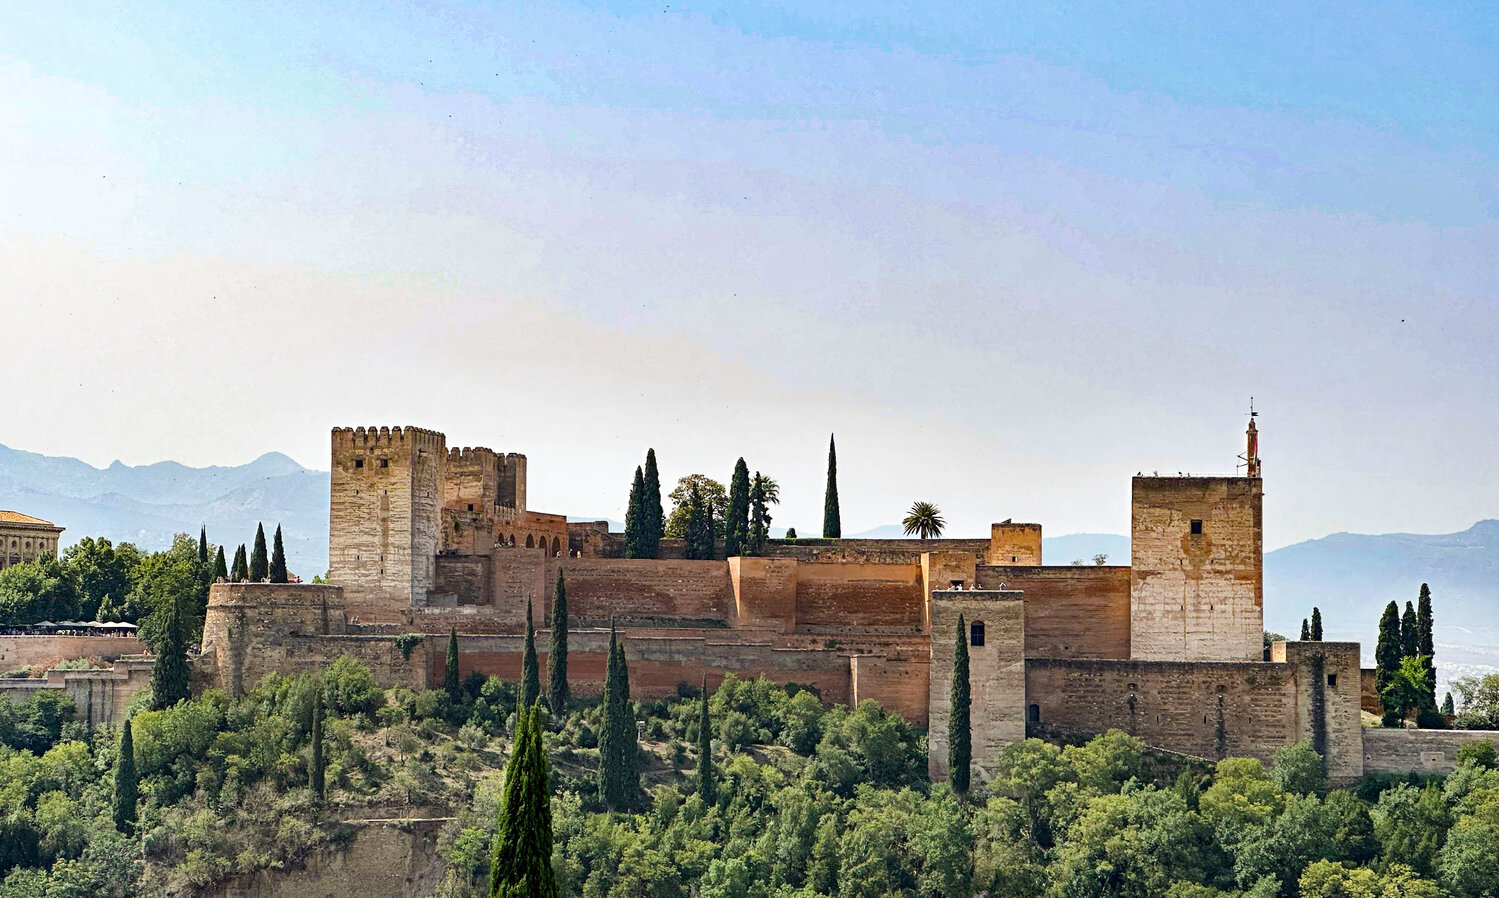 <p><em>The Alhambra in Granada is a Moorish fortress made up of palaces and gardens.  Across the city, at the Mirador de San Nicolás, one can see the complete fortress for great picture opportunities.</em></p>